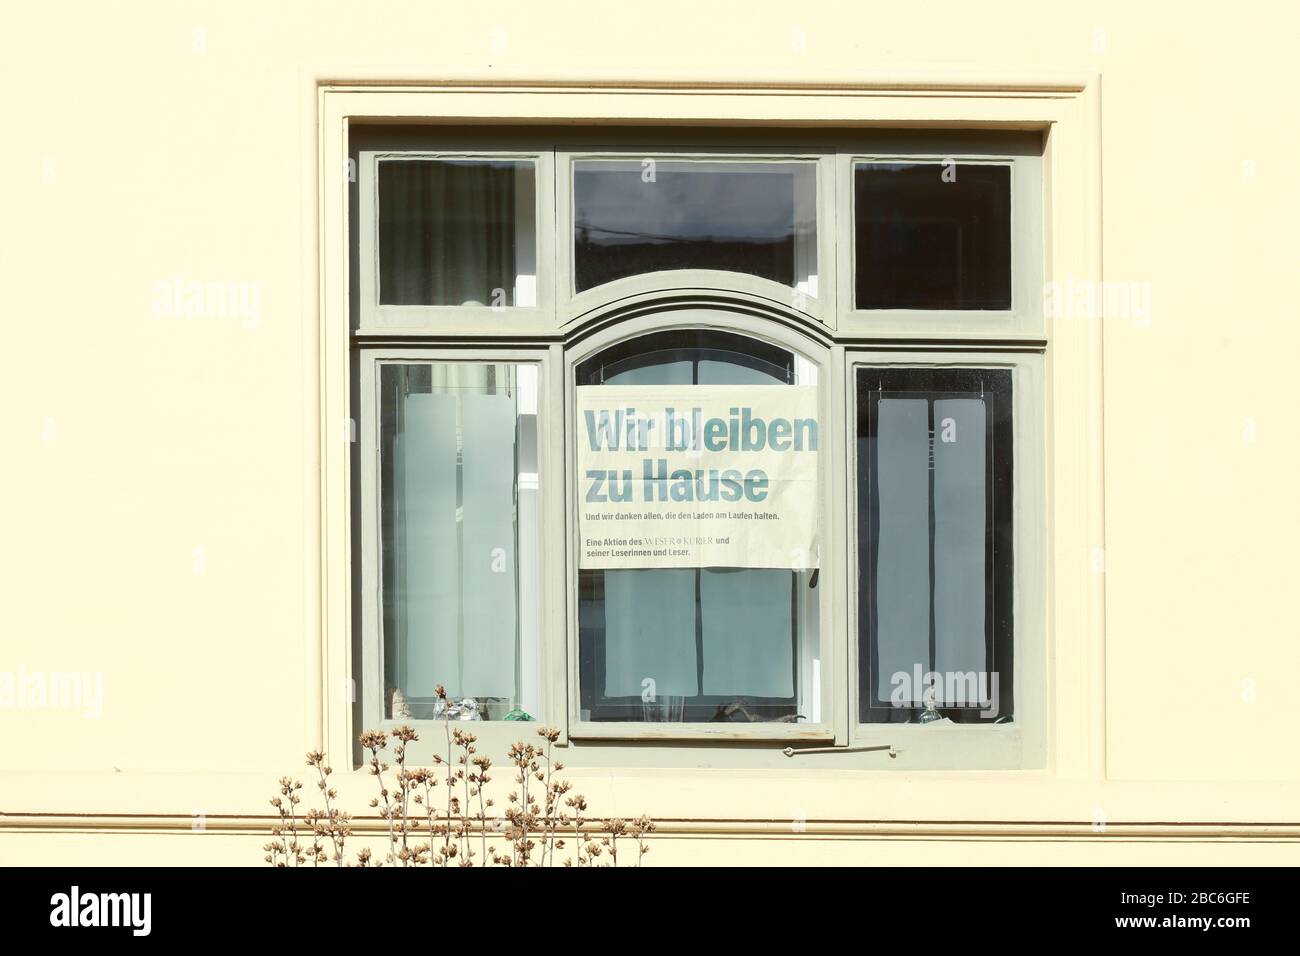 Window with sign We stay at home because of corona, Bremen, Germany, Europe Stock Photo